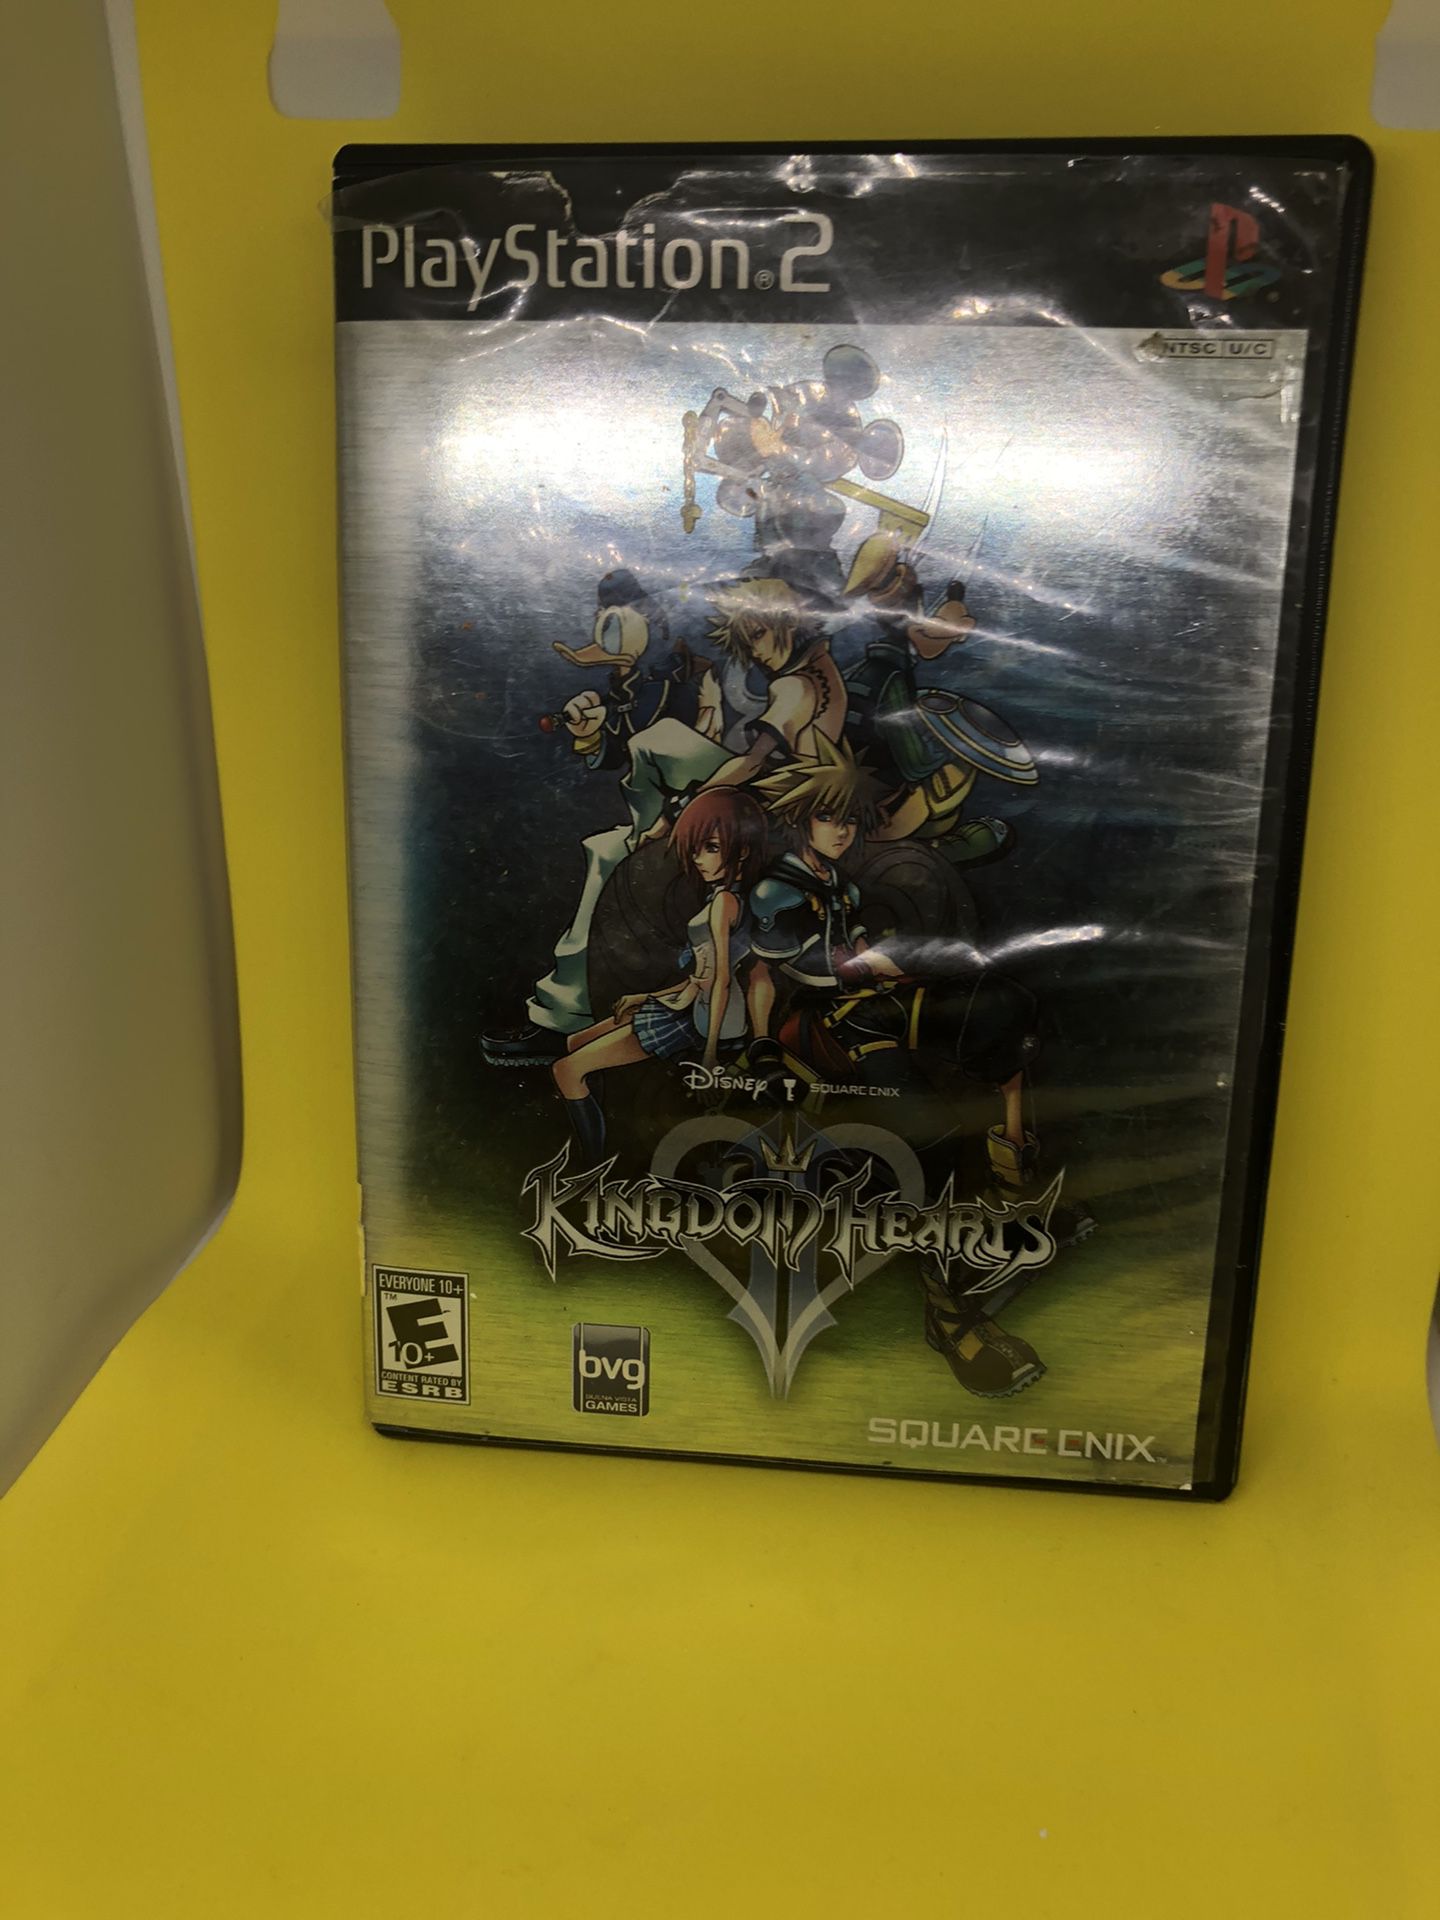 Kingdom Hearts 2 Playstation 2 PS2 Video Game Complete Mickey Mouse Disney